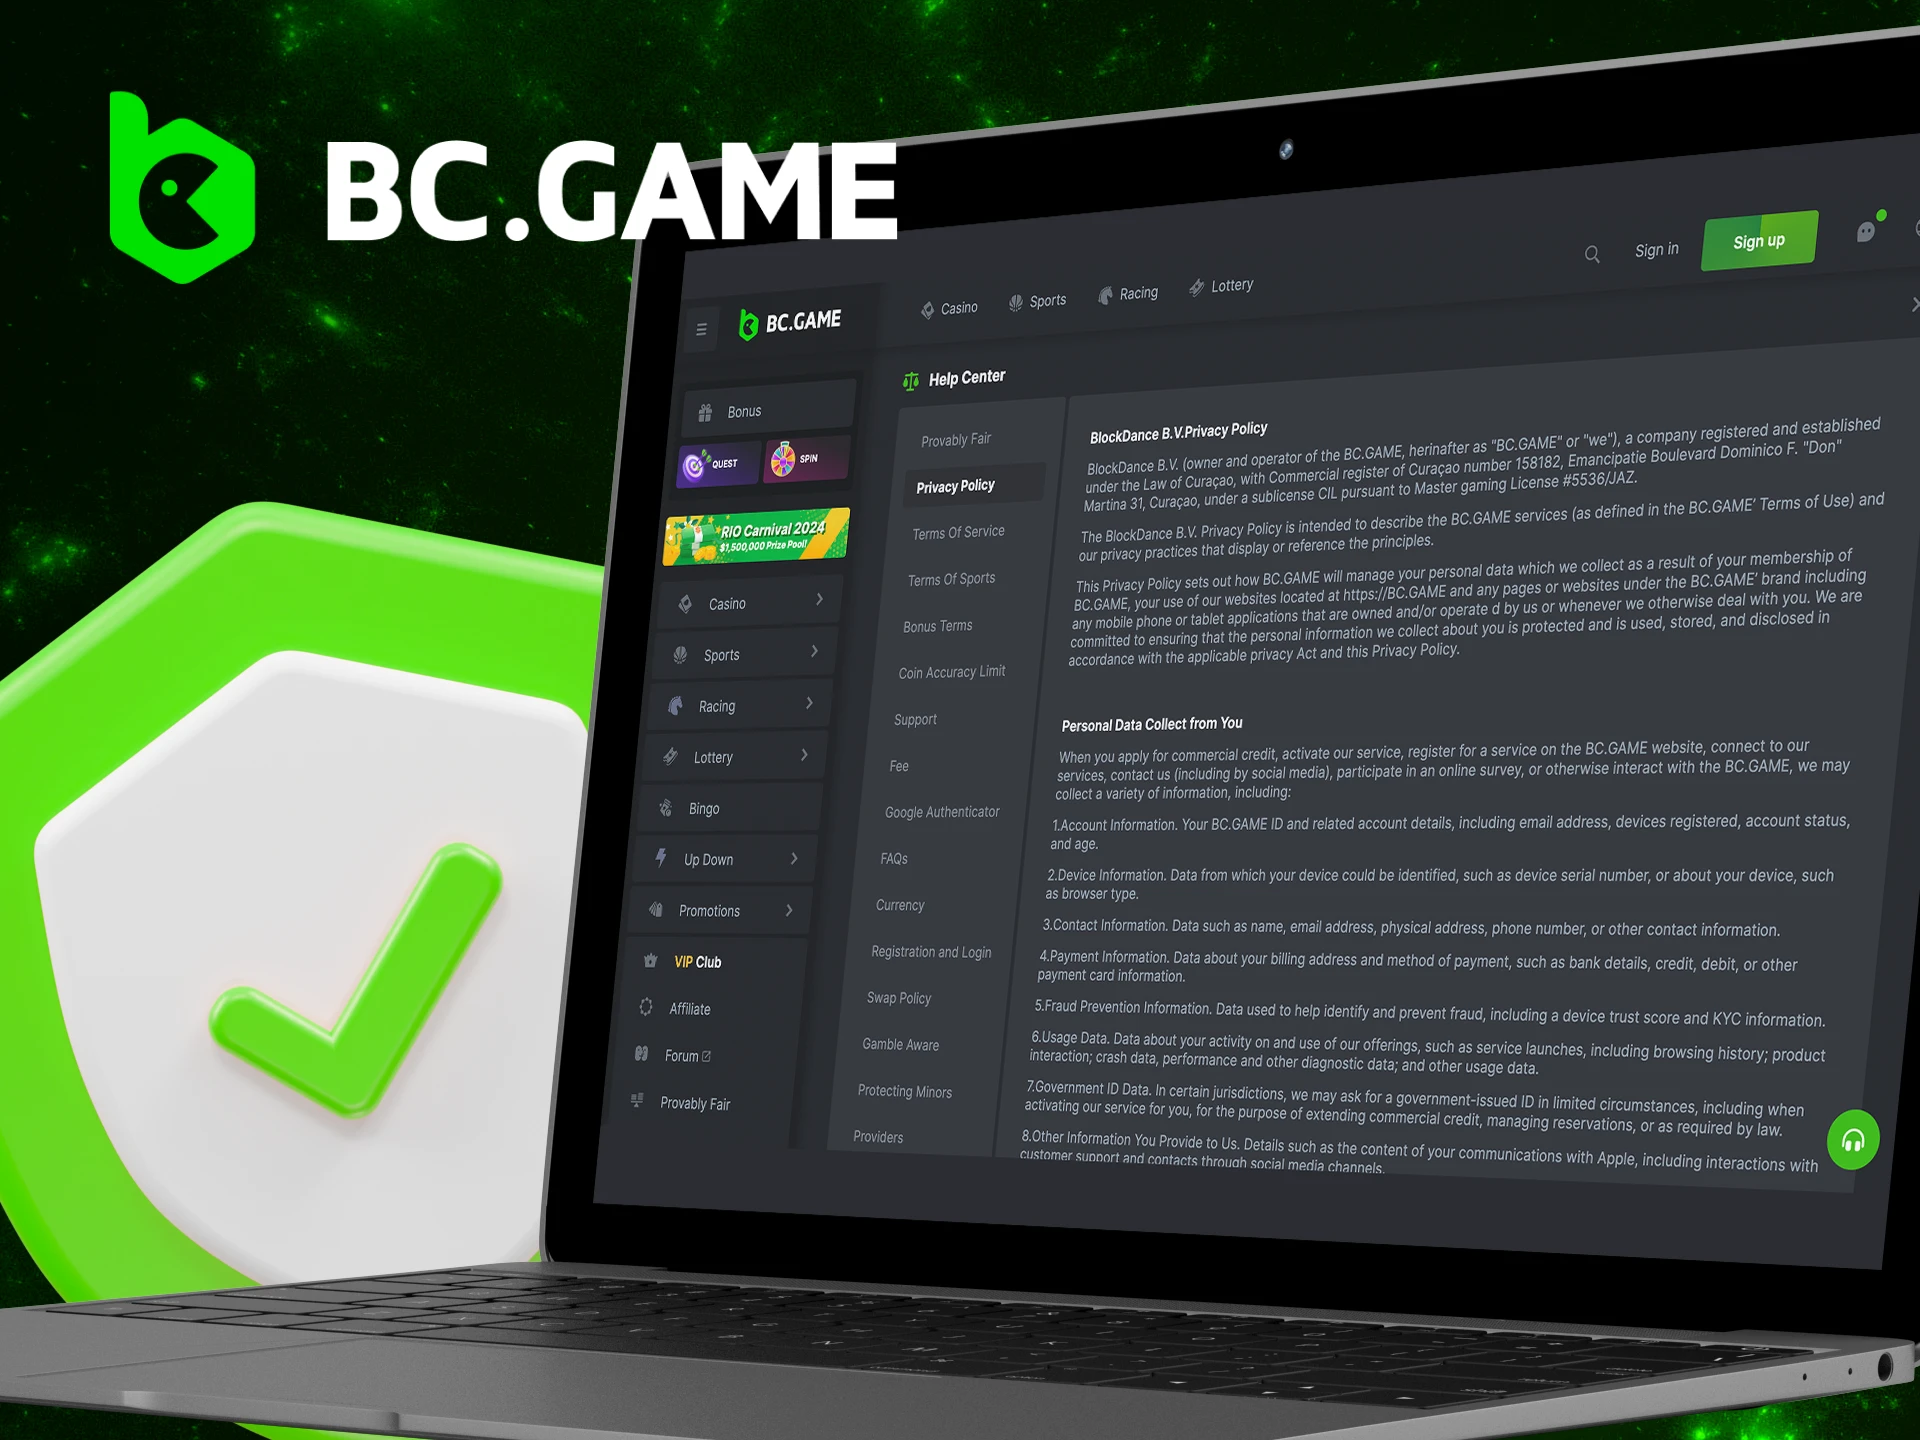 What is the Personal Data Policy at the BC Game online casino in India.